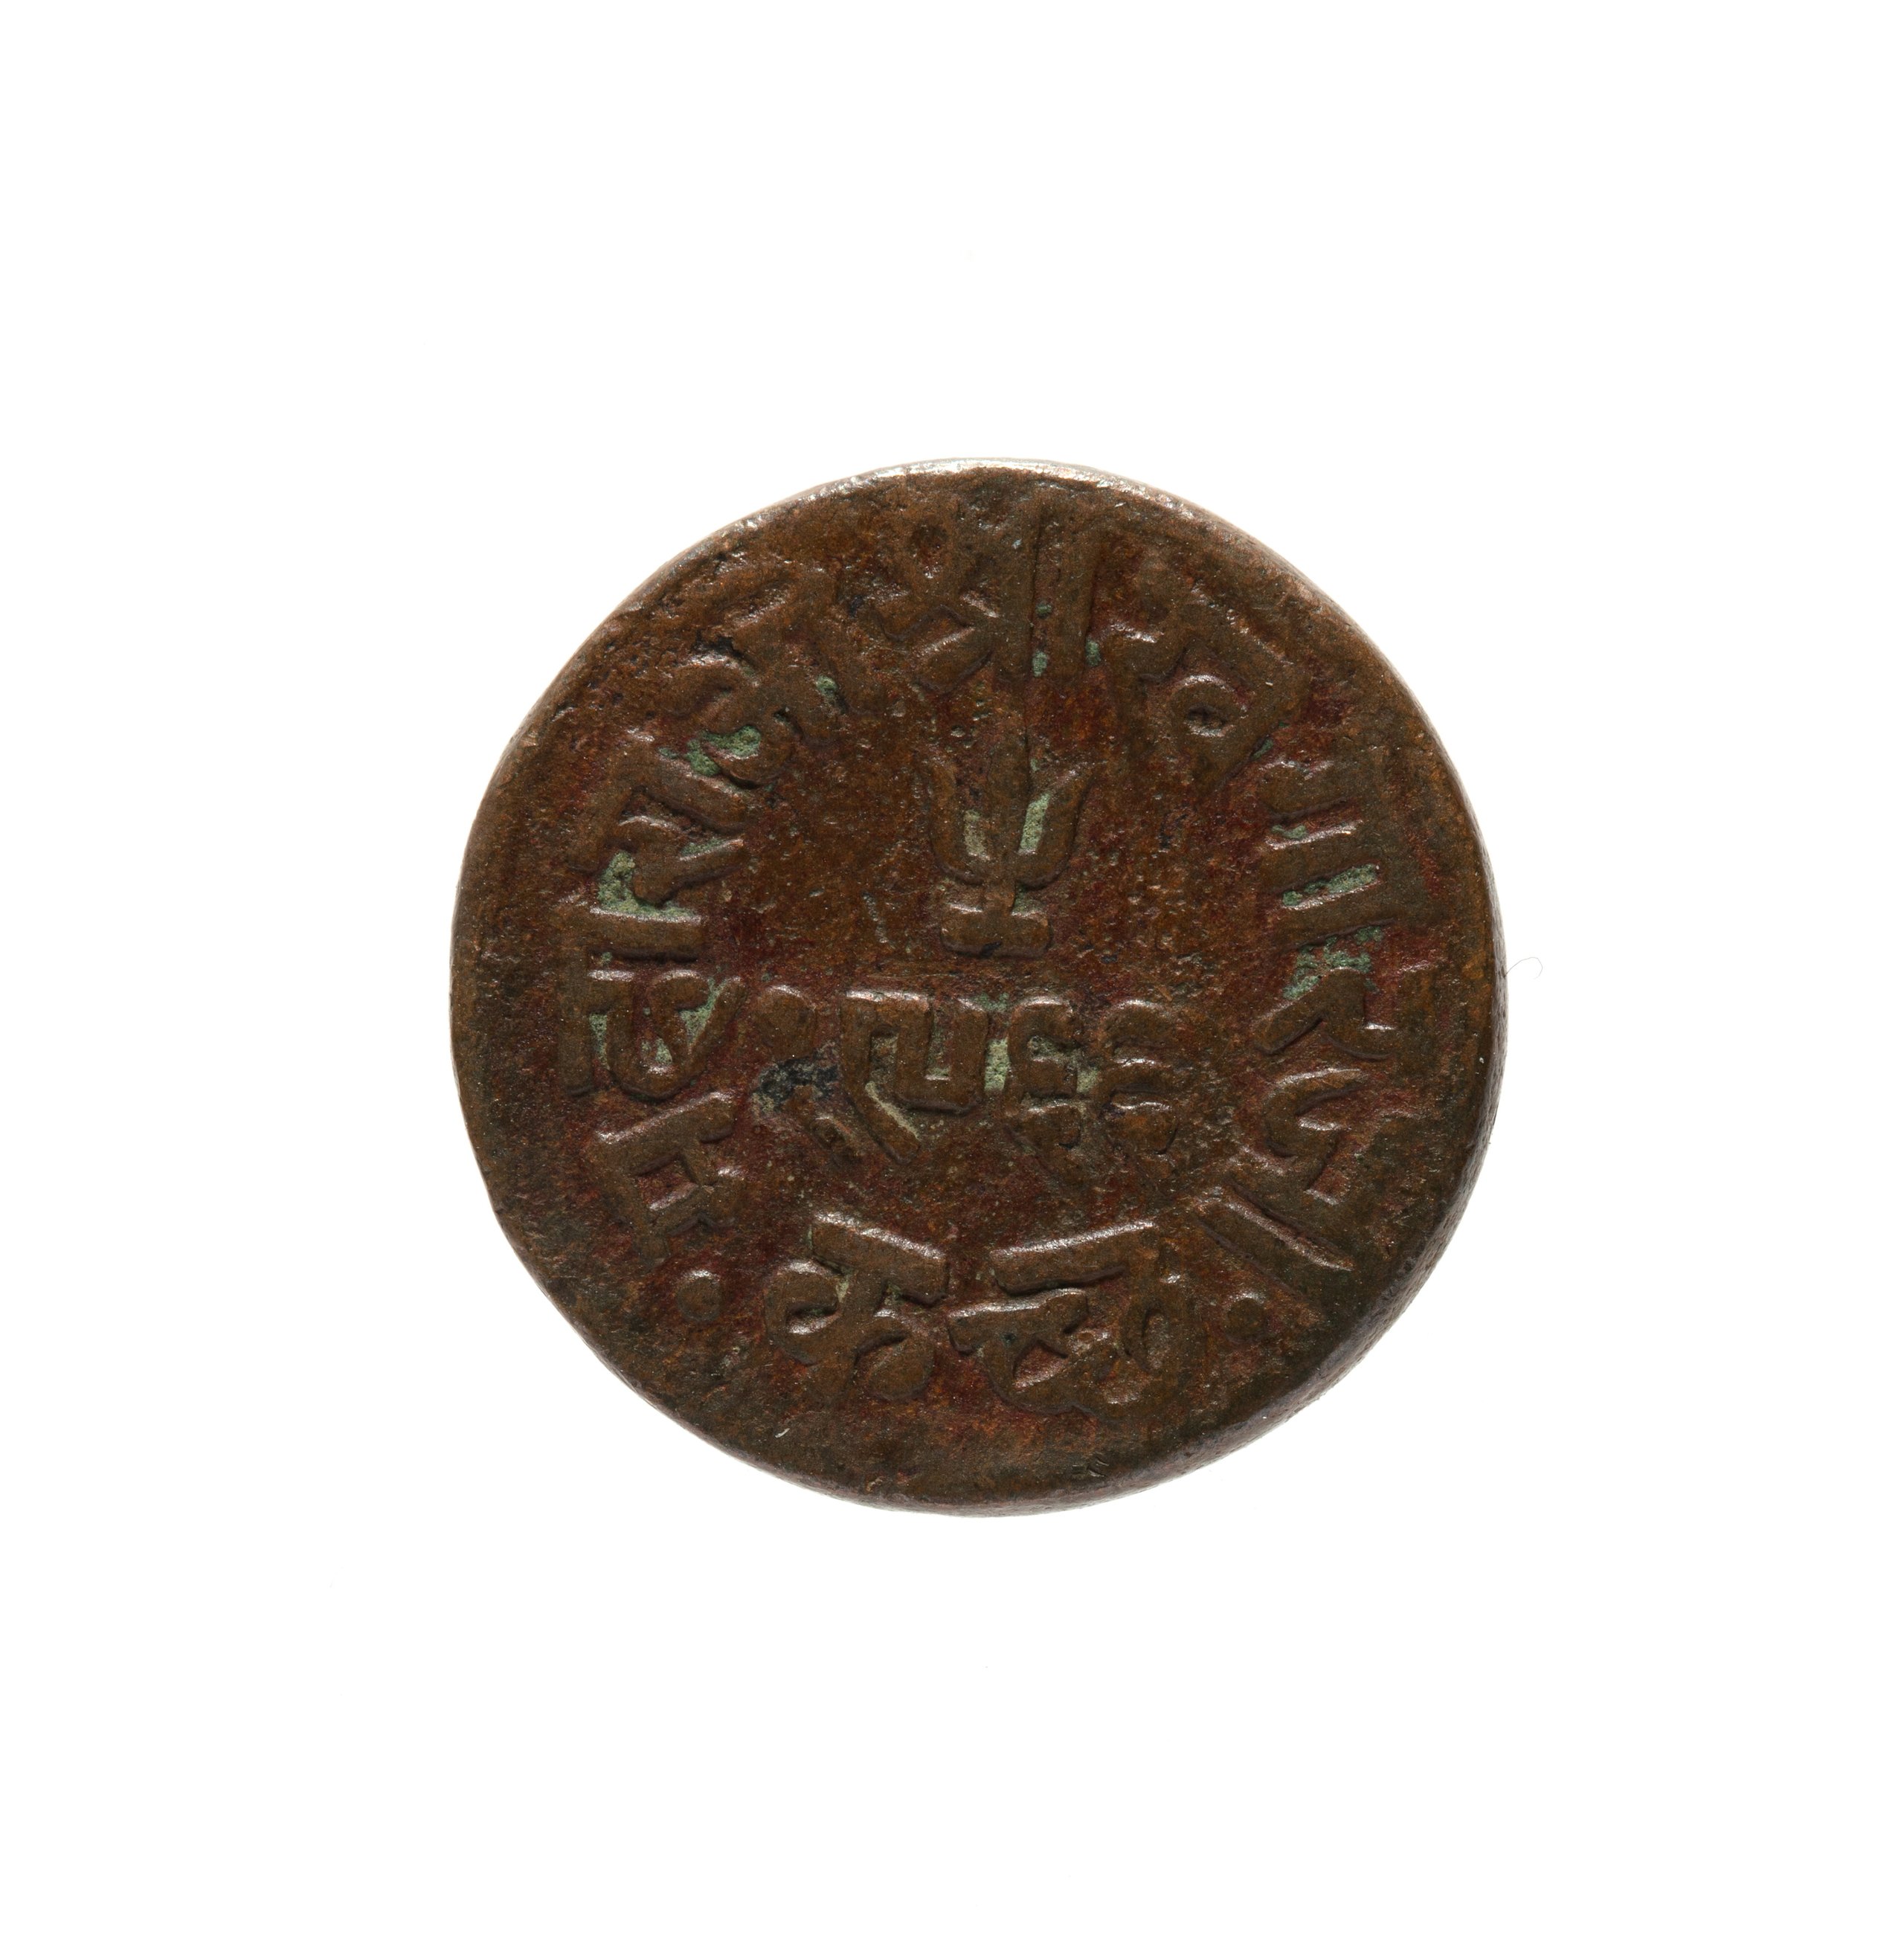 One Trambiyo coin from the Princely State of Kutch